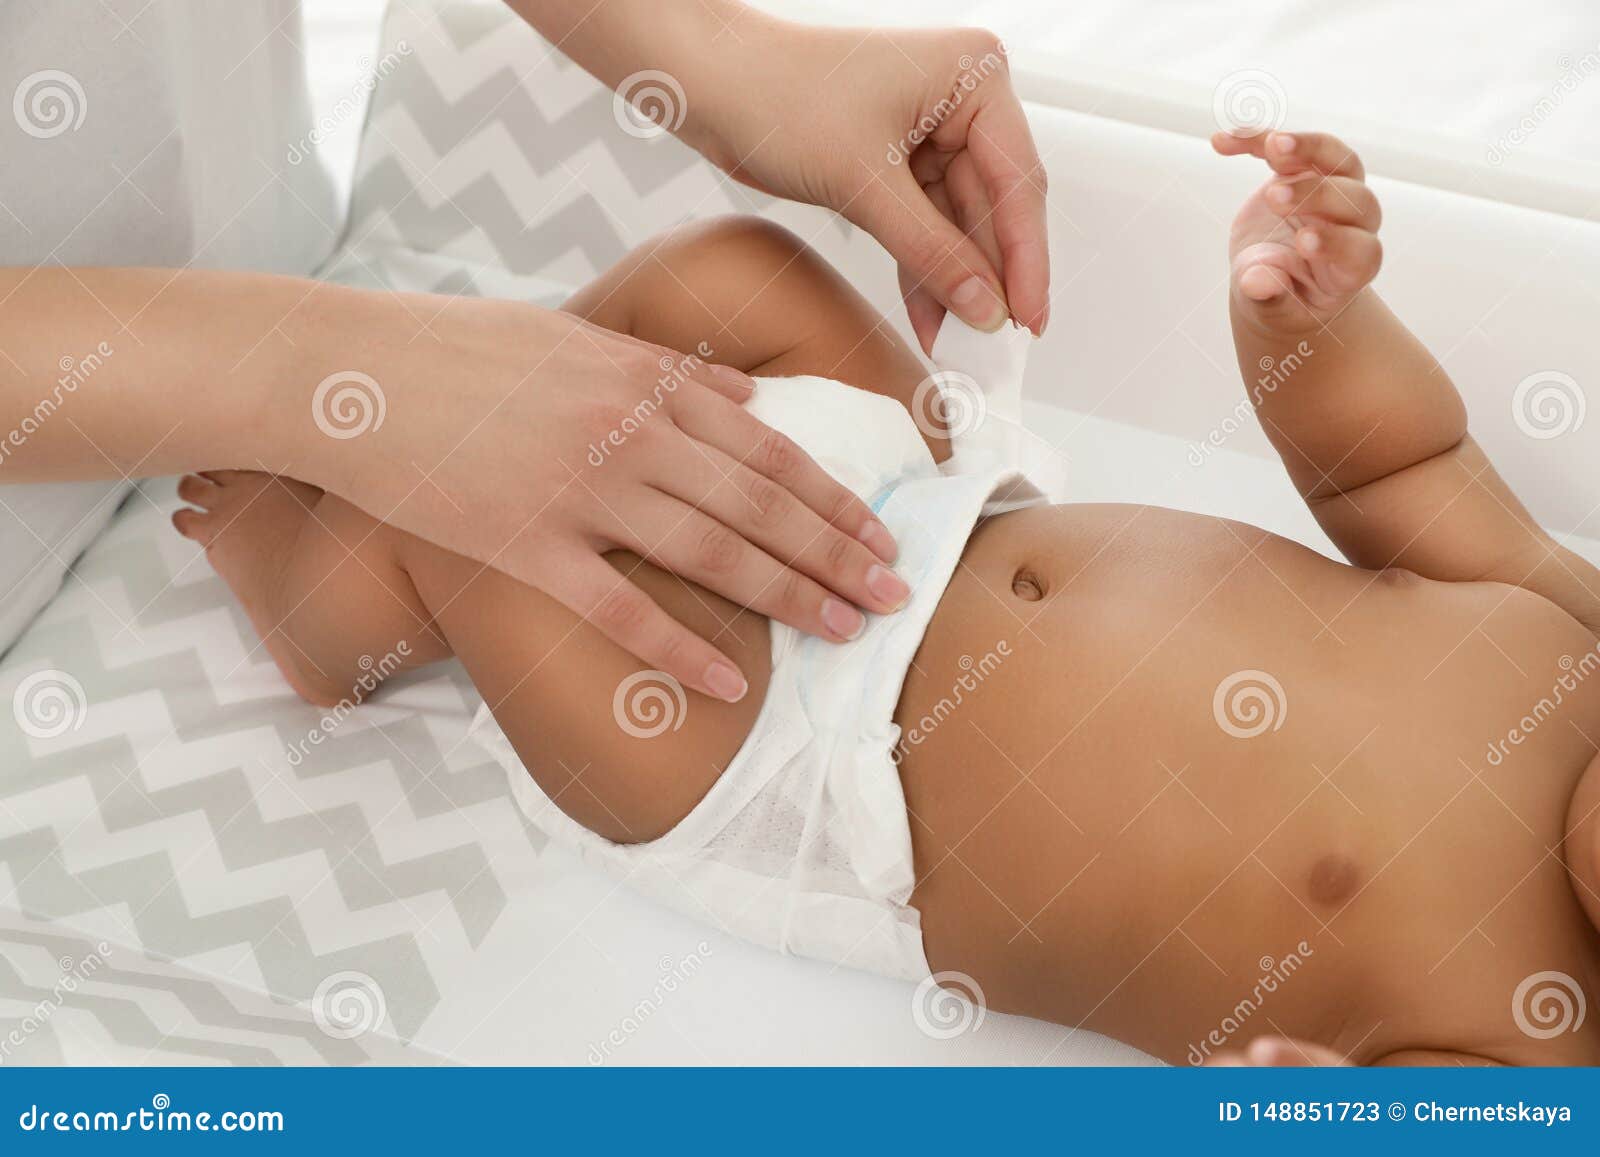 mother changing her baby`s diaper on table